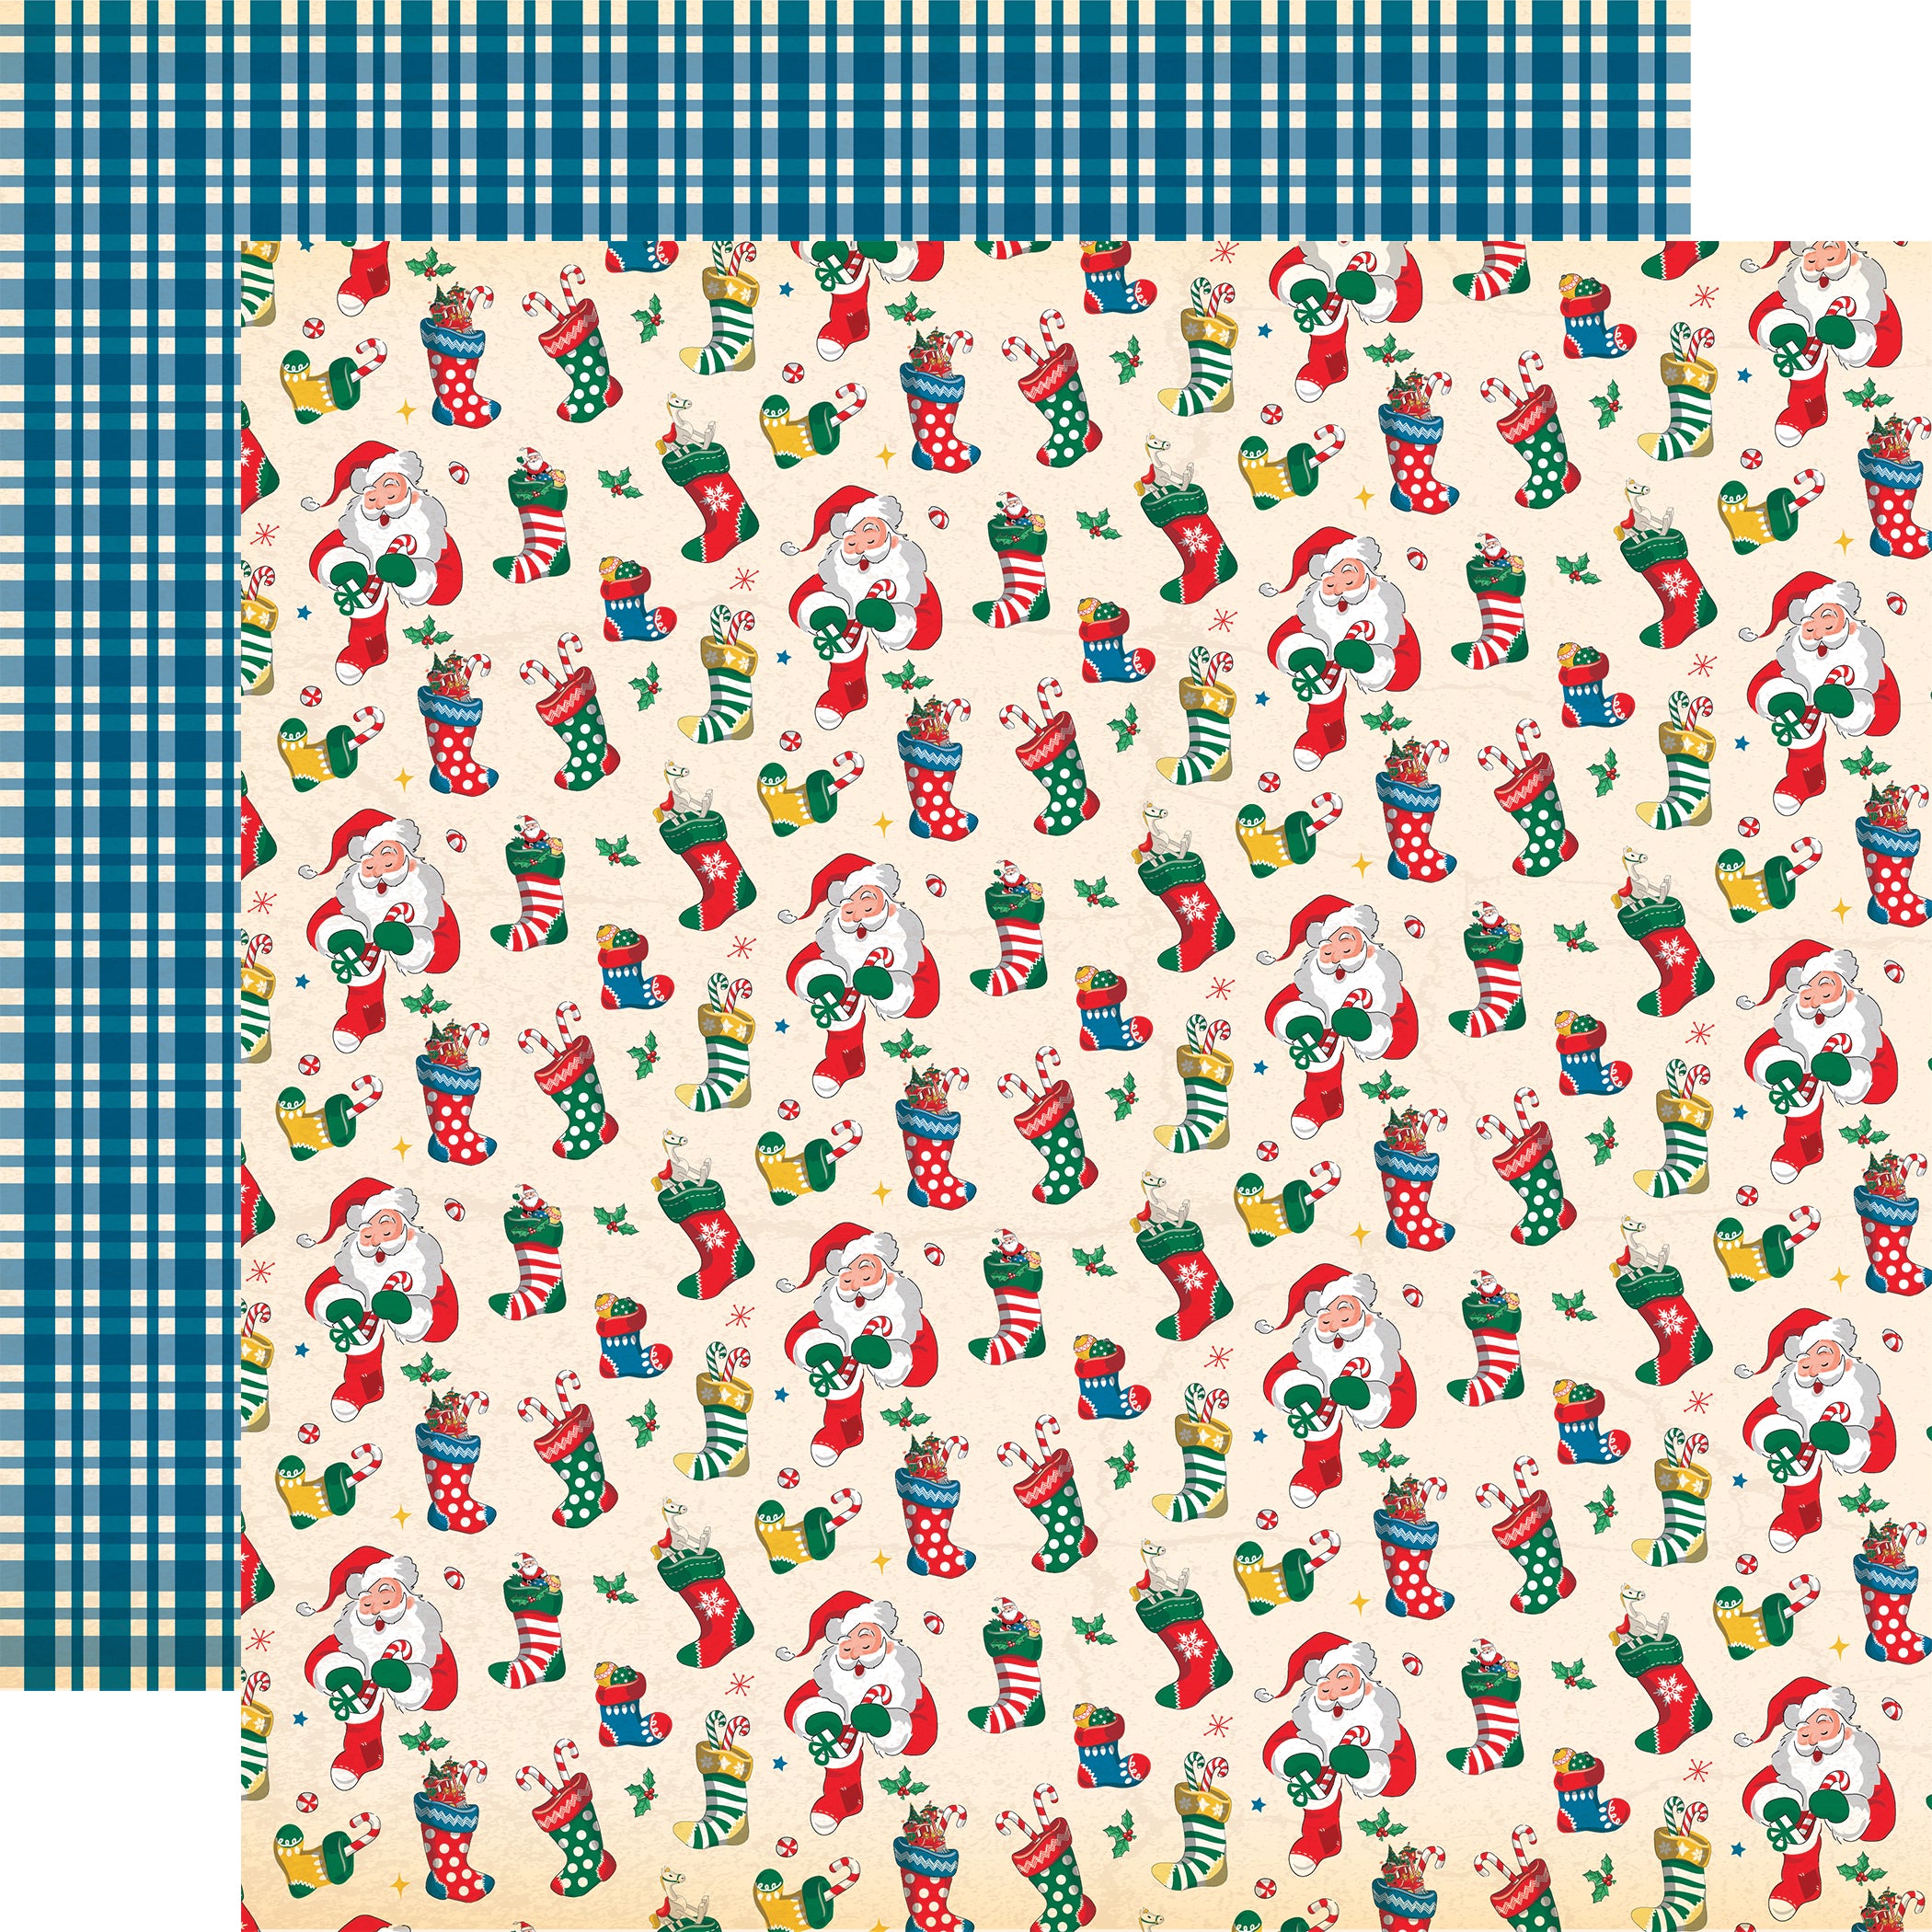 Season's Greetings Collection Stuffed Stockings 12 x 12 Double-Sided Scrapbook Paper by Carta Bella